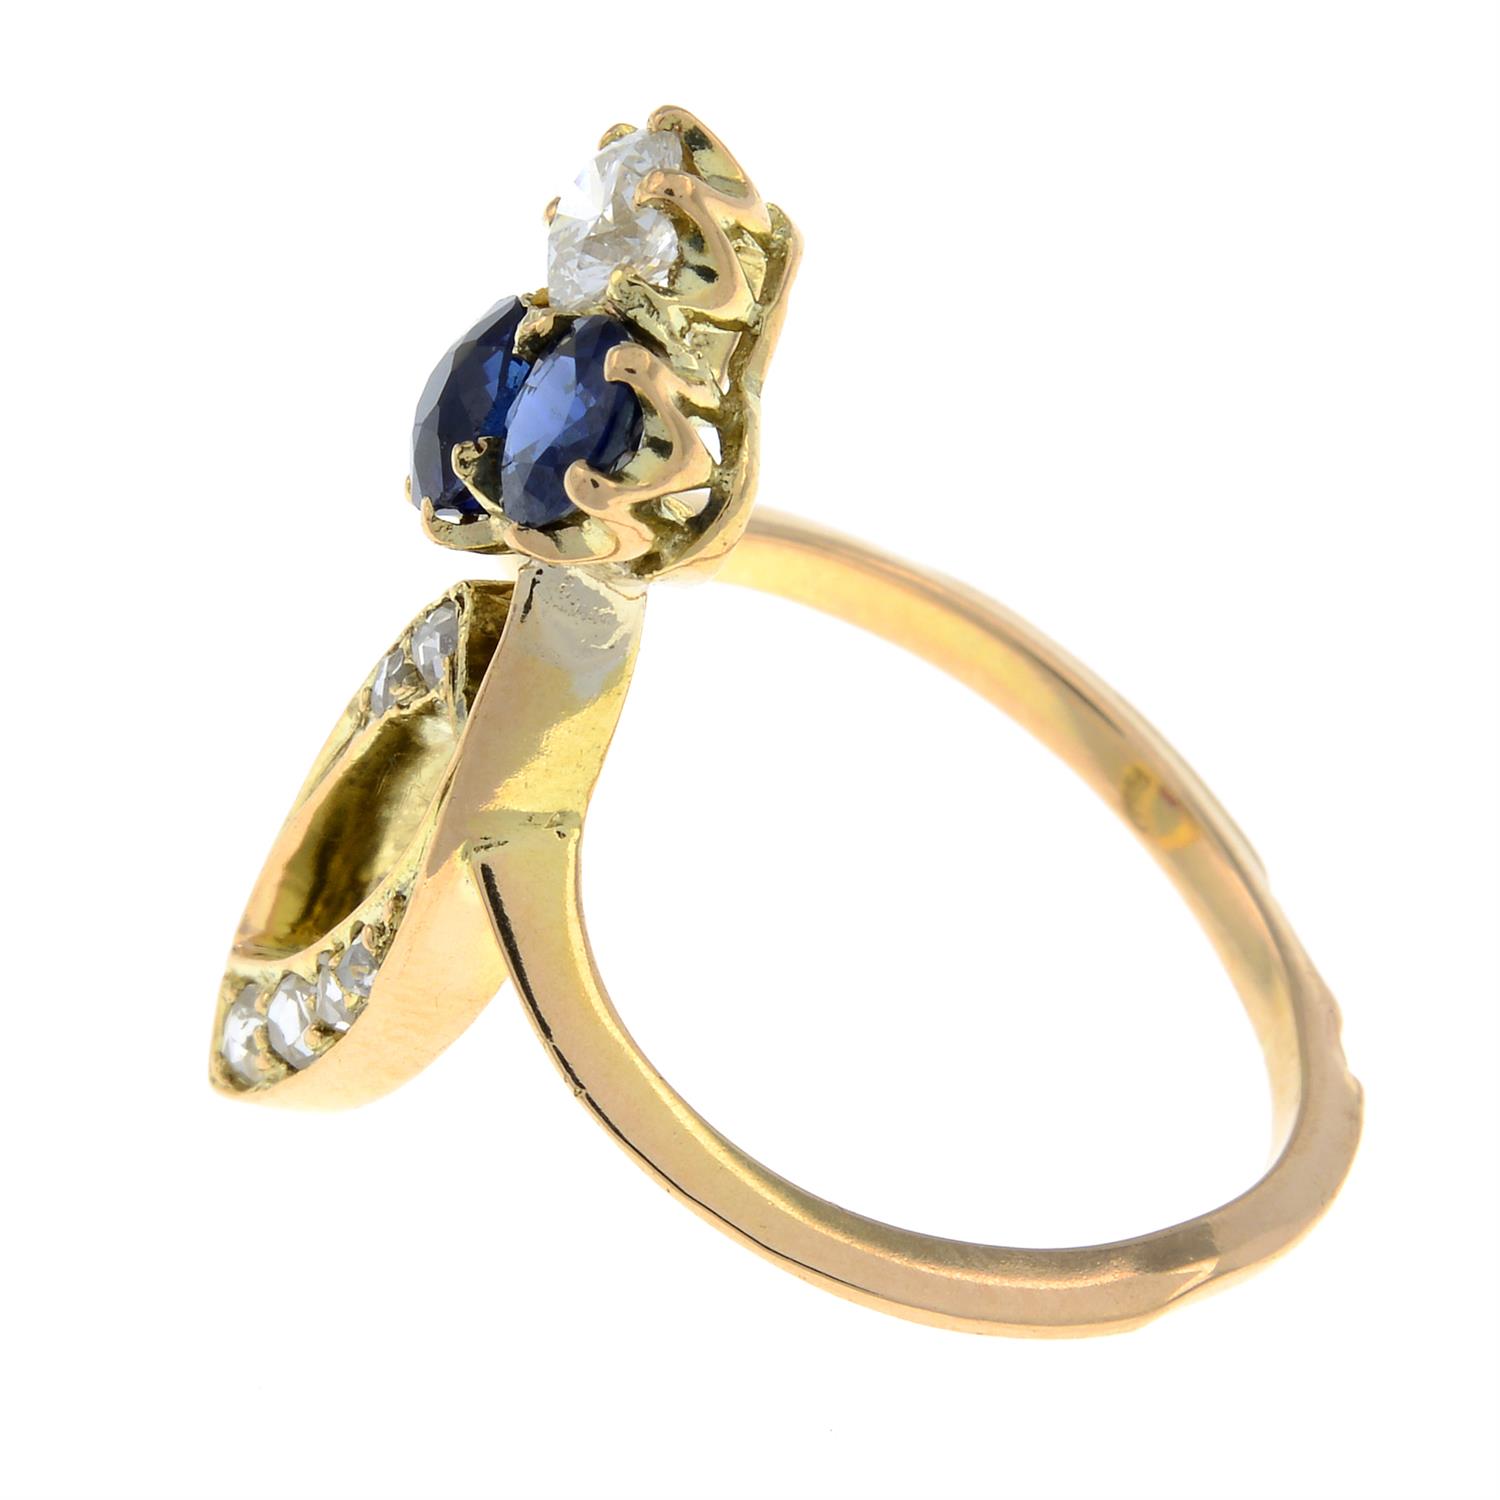 Russian Art Nouveau gold diamond and sapphire ring - Image 4 of 5